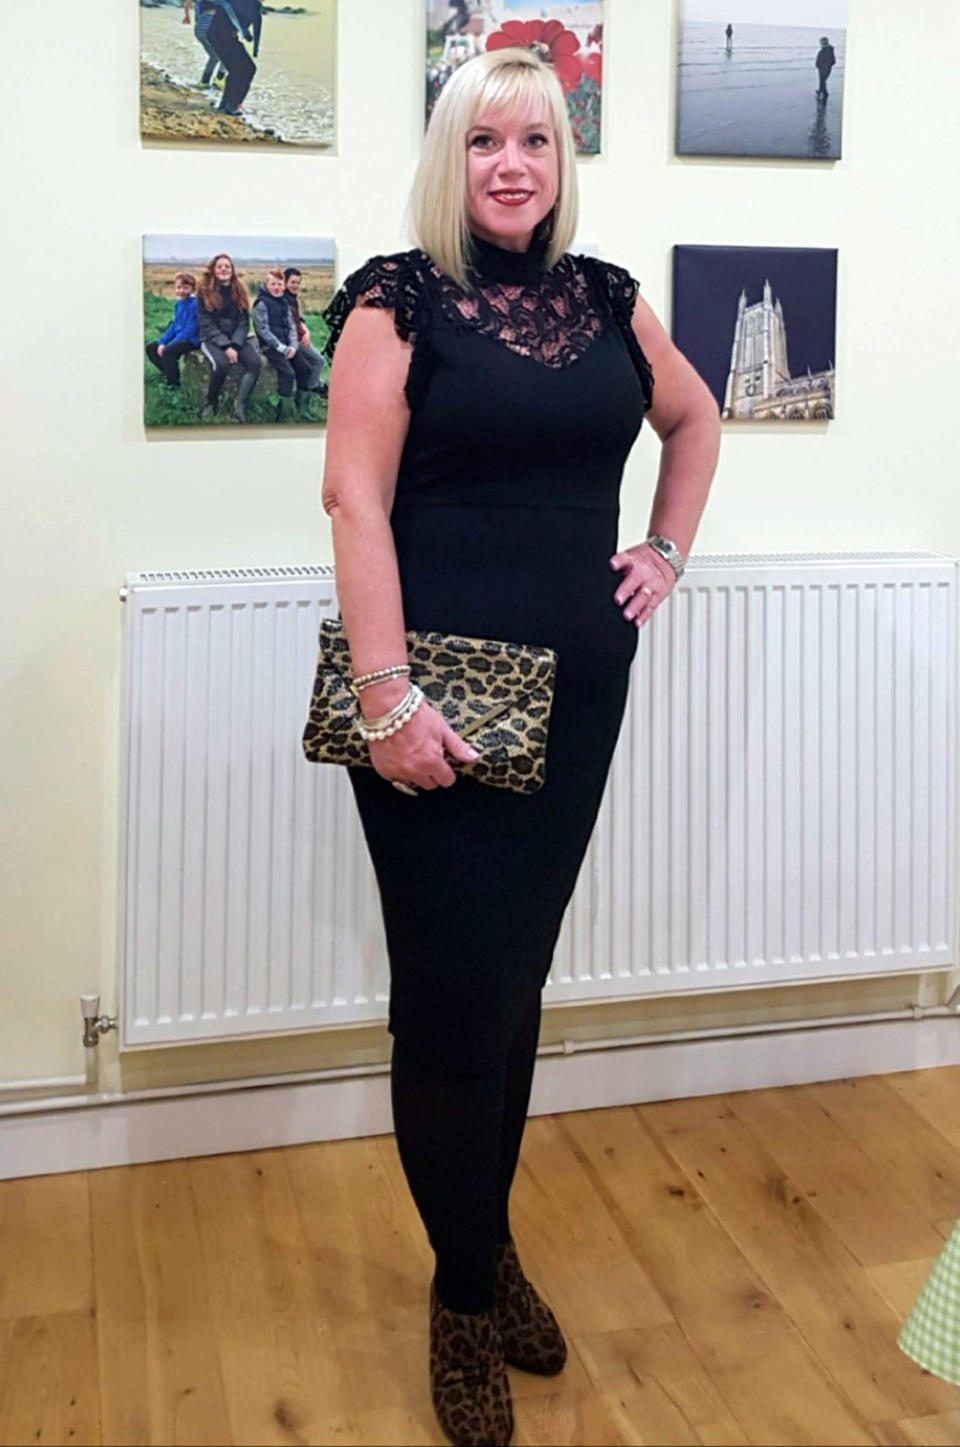 With the support of her family, the mother-of-four lost six stone [Photo: Caters]